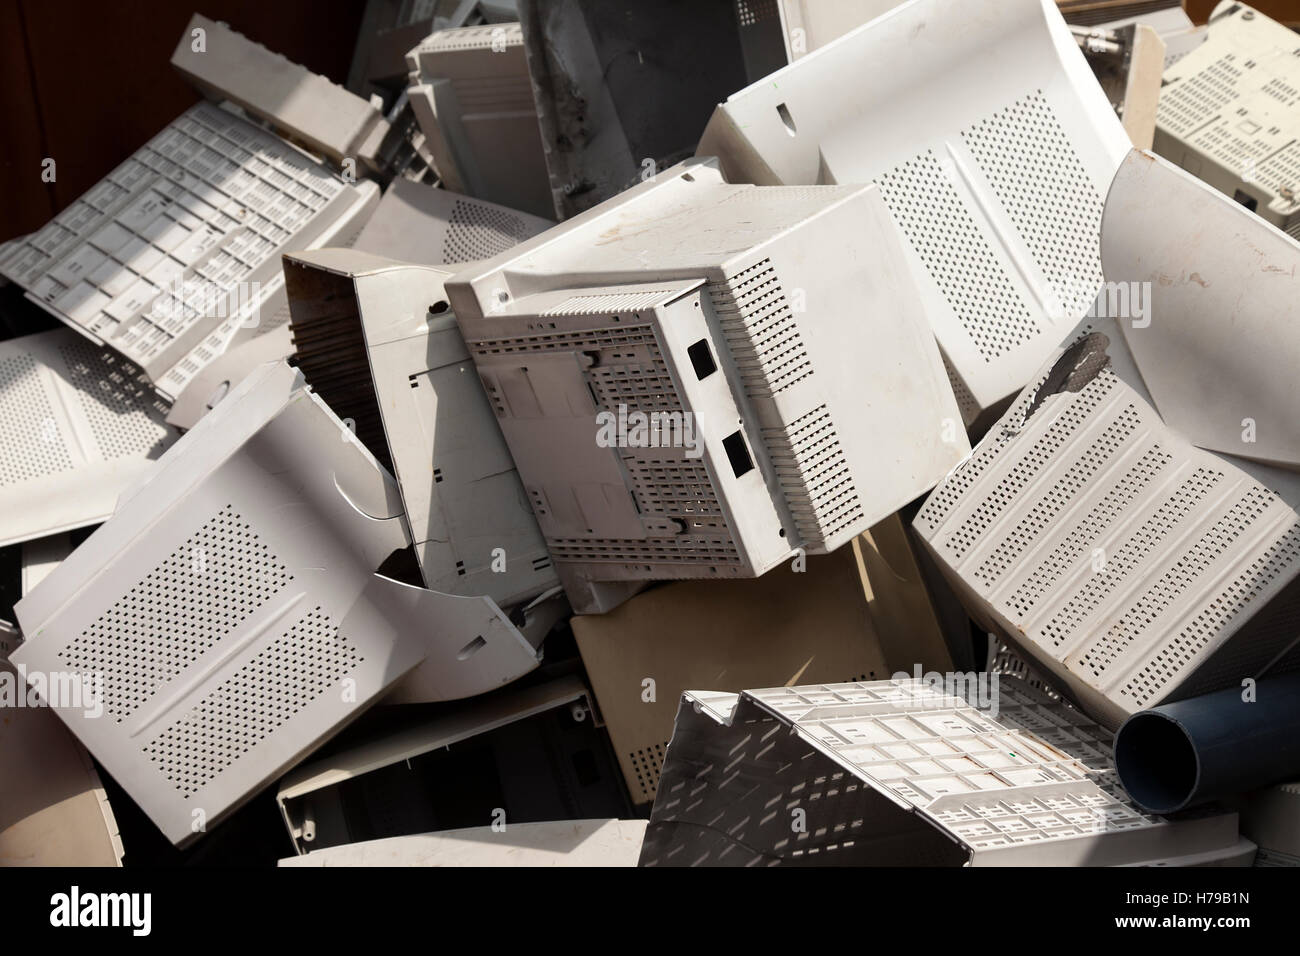 A pile of old broken monitor plastic shells ready for recycling. Stock Photo